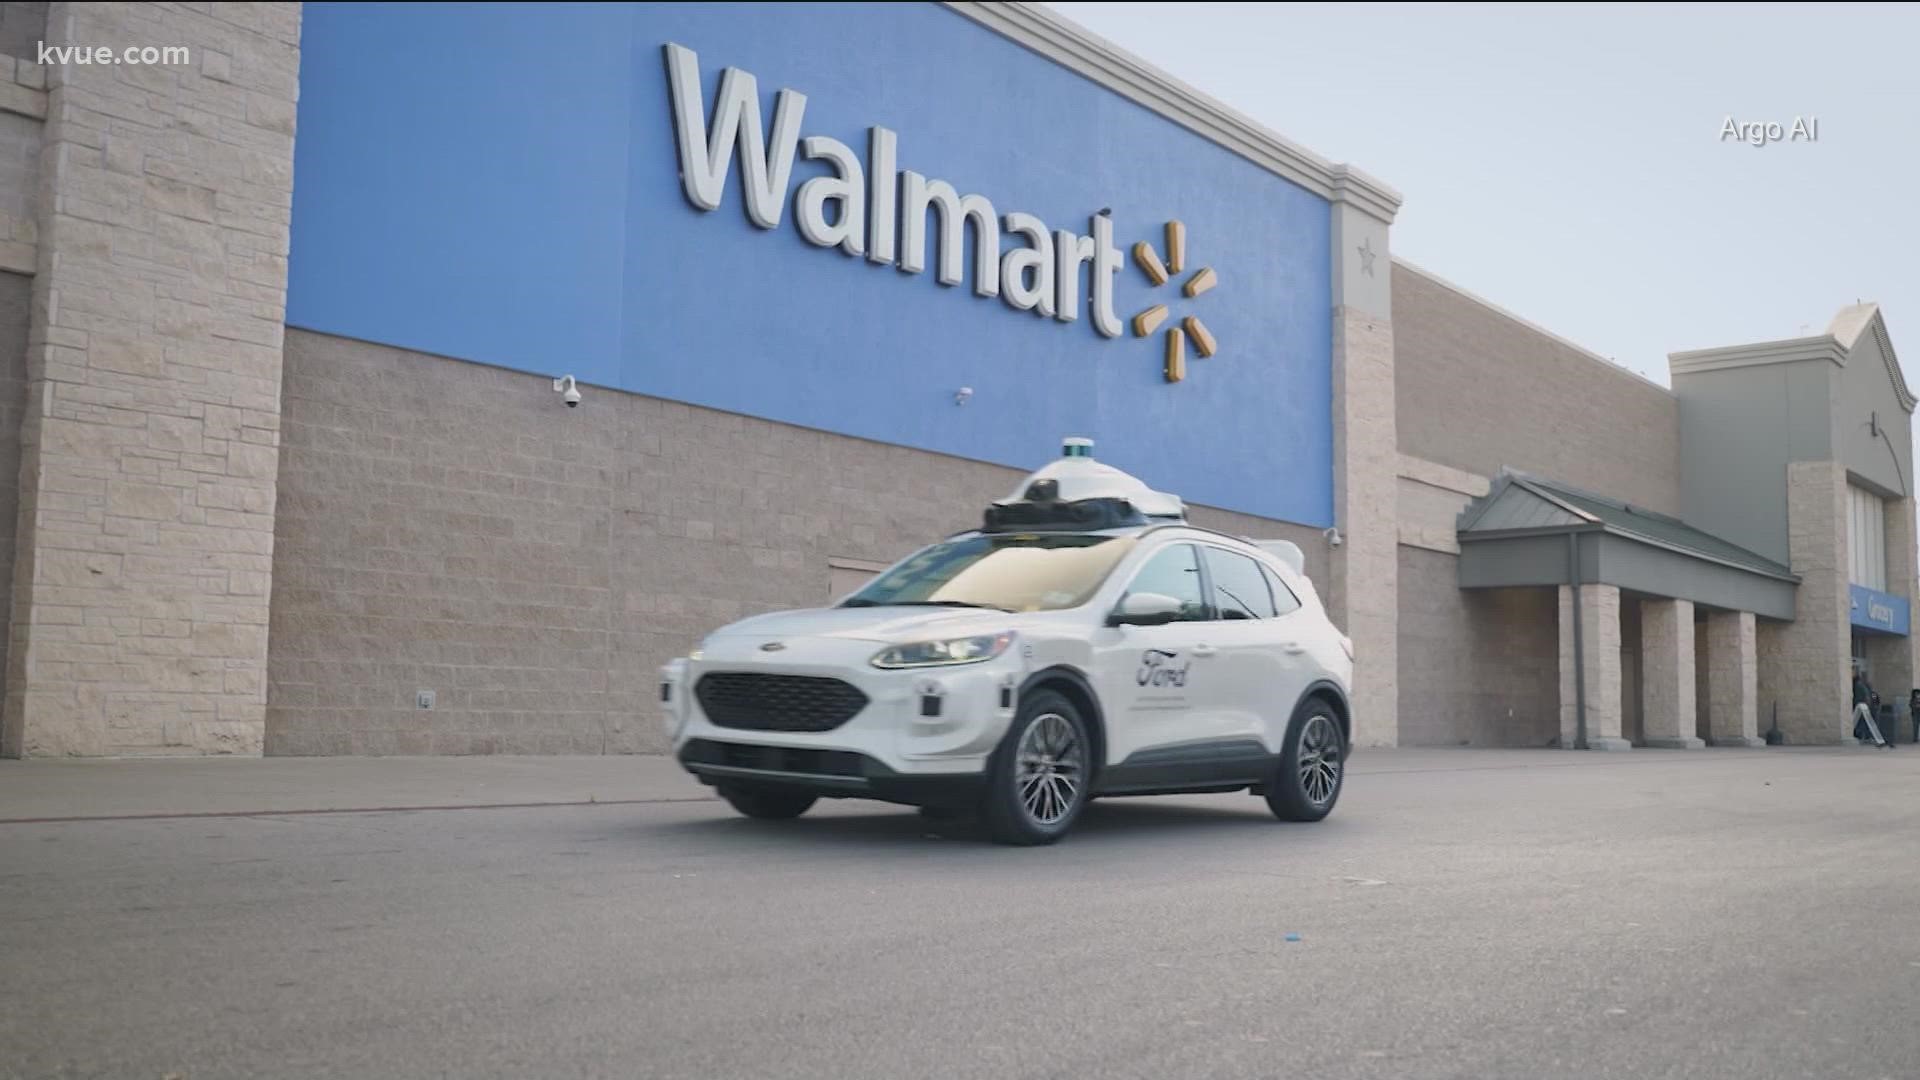 It won't be long before a self-driving vehicle could deliver your Walmart order in the Austin area. KVUE's Bryce Newberry has the details.